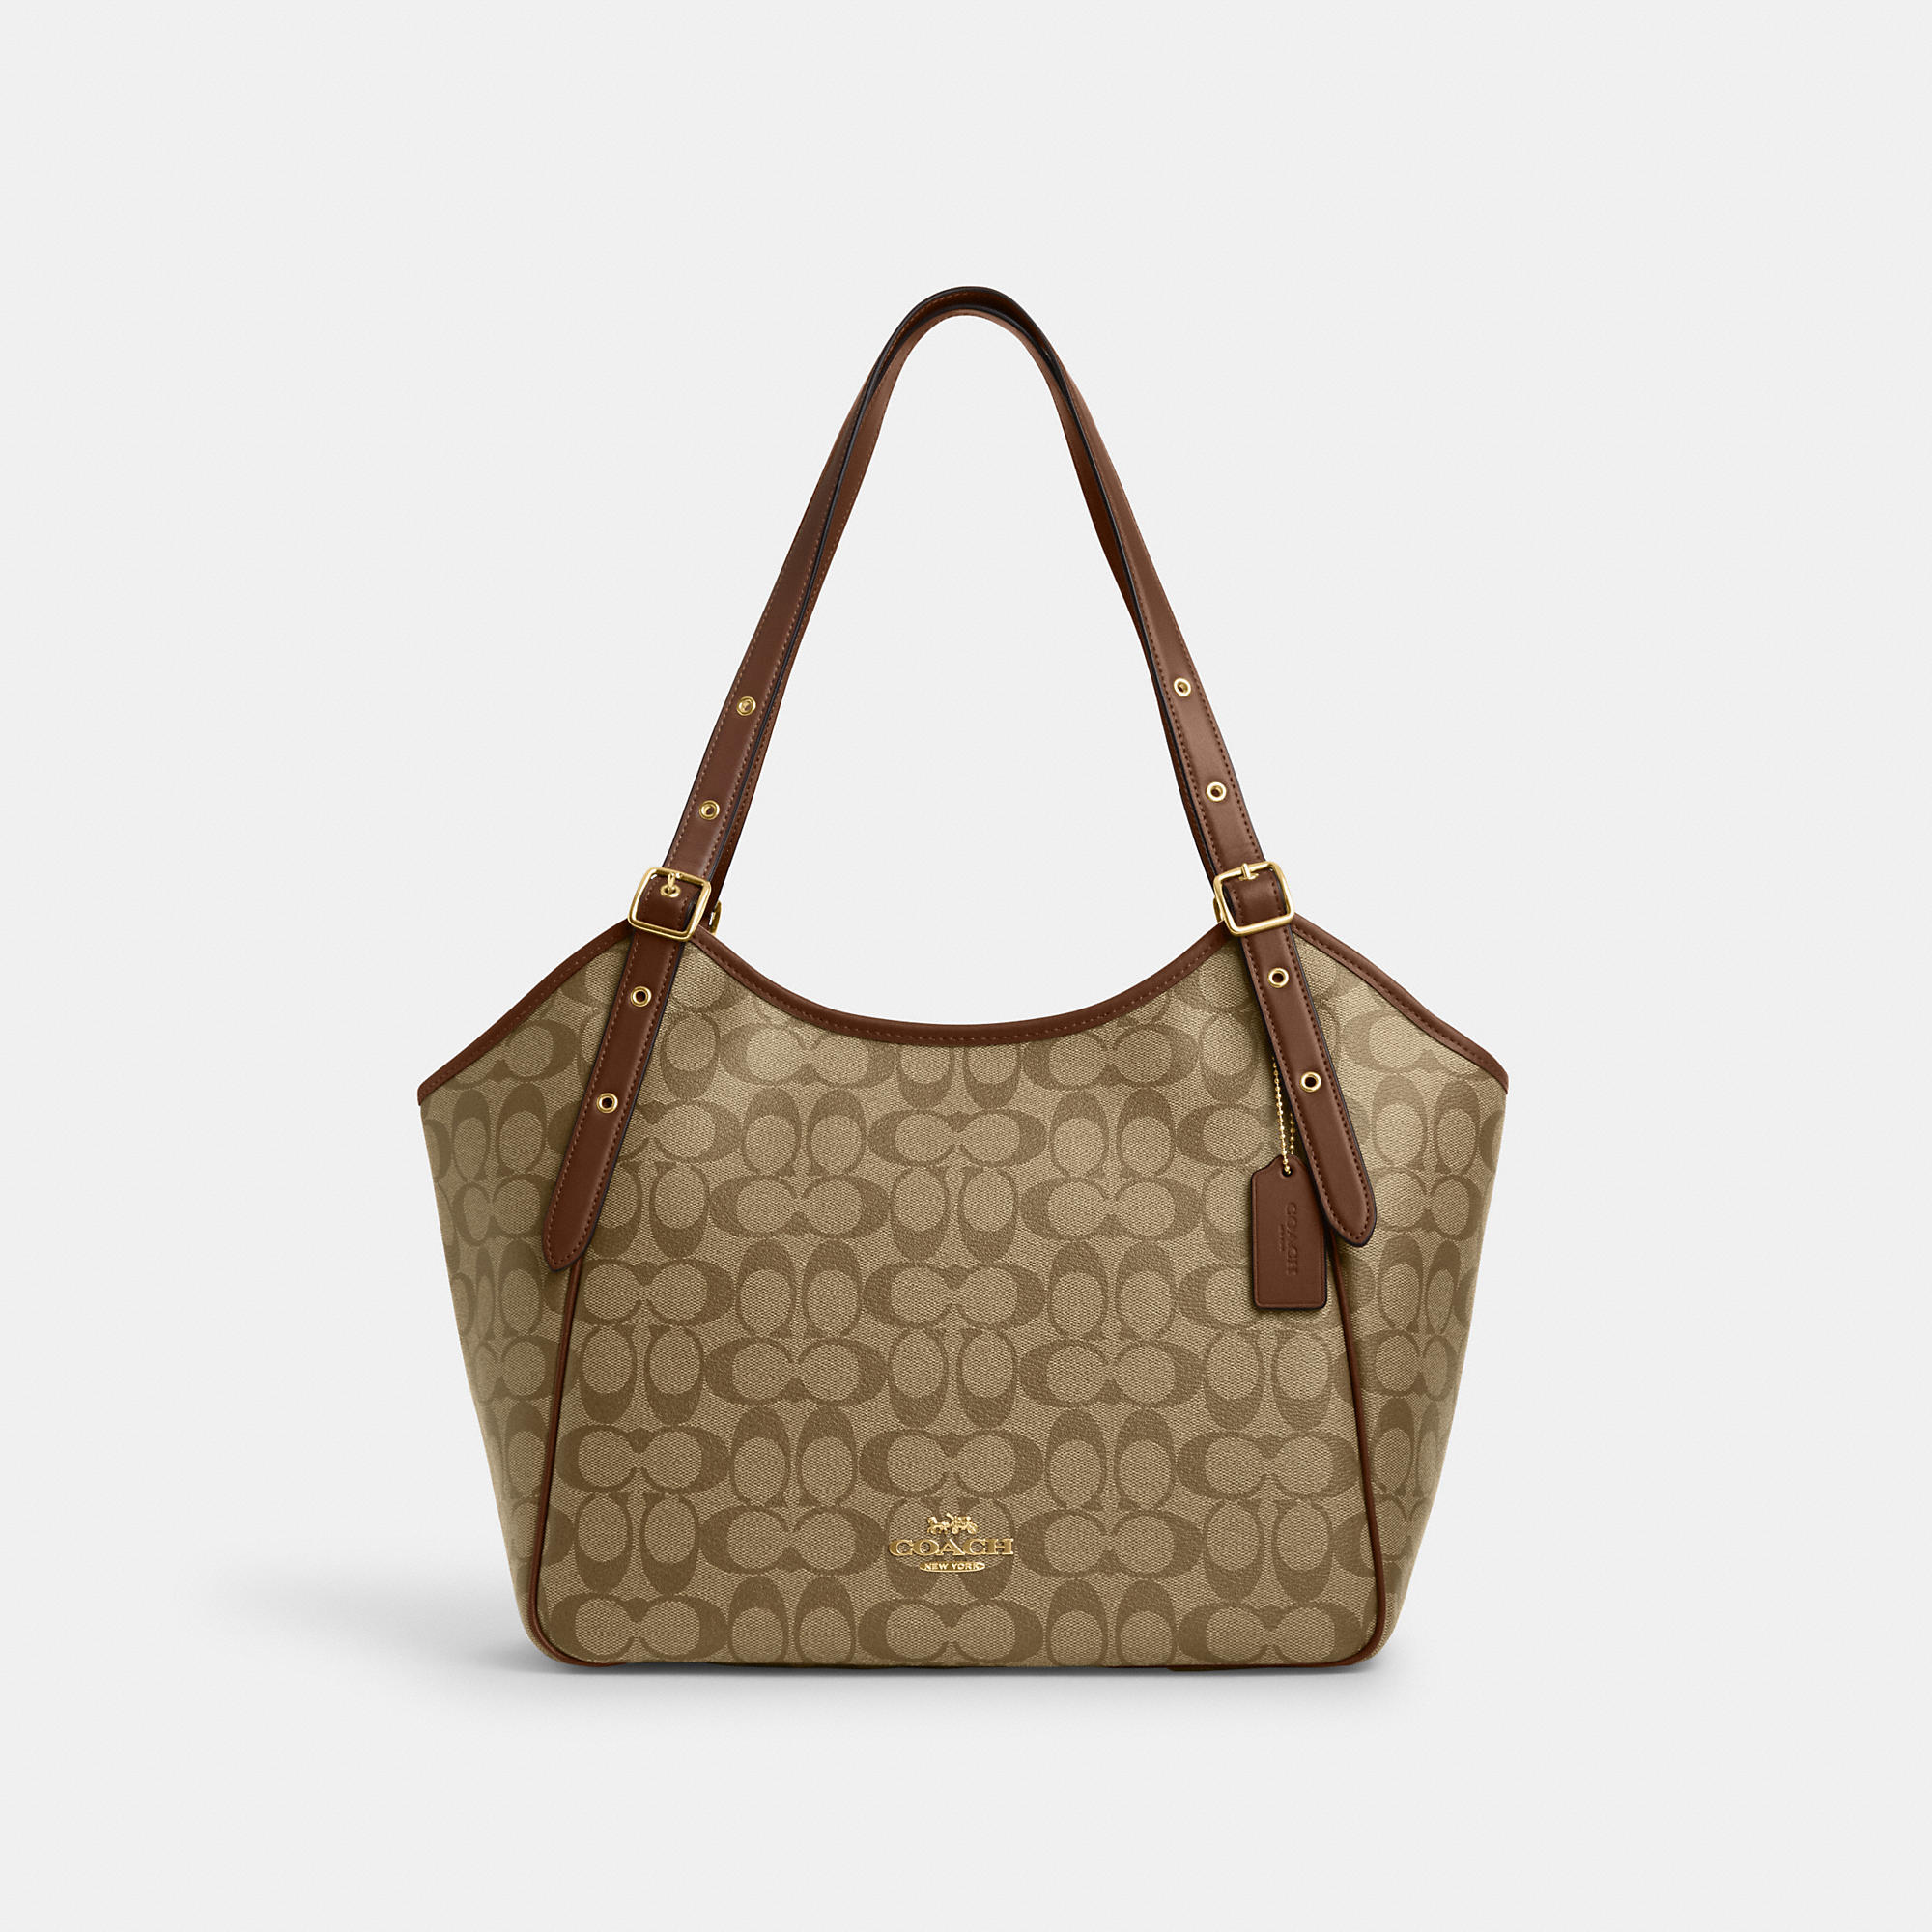 COACH OUTLET MEADOW SHOULDER BAG IN SIGNATURE CANVAS